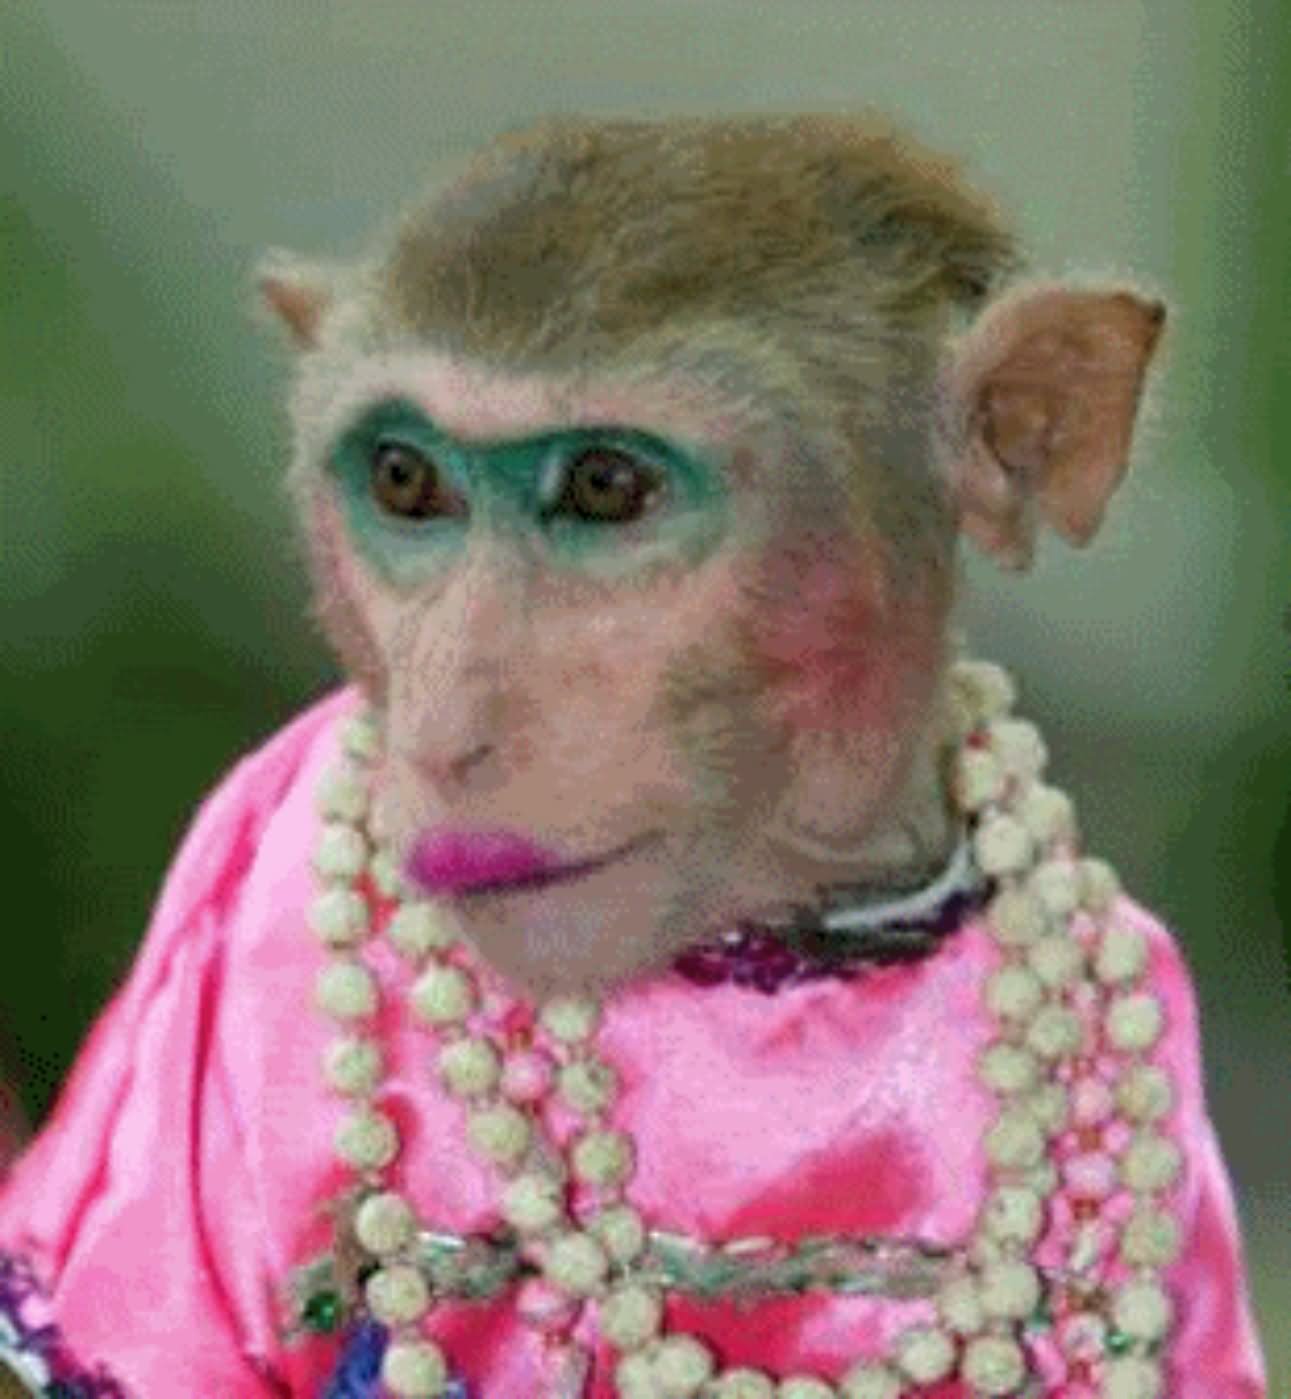 Monkey With Funny Makeup Face Image.